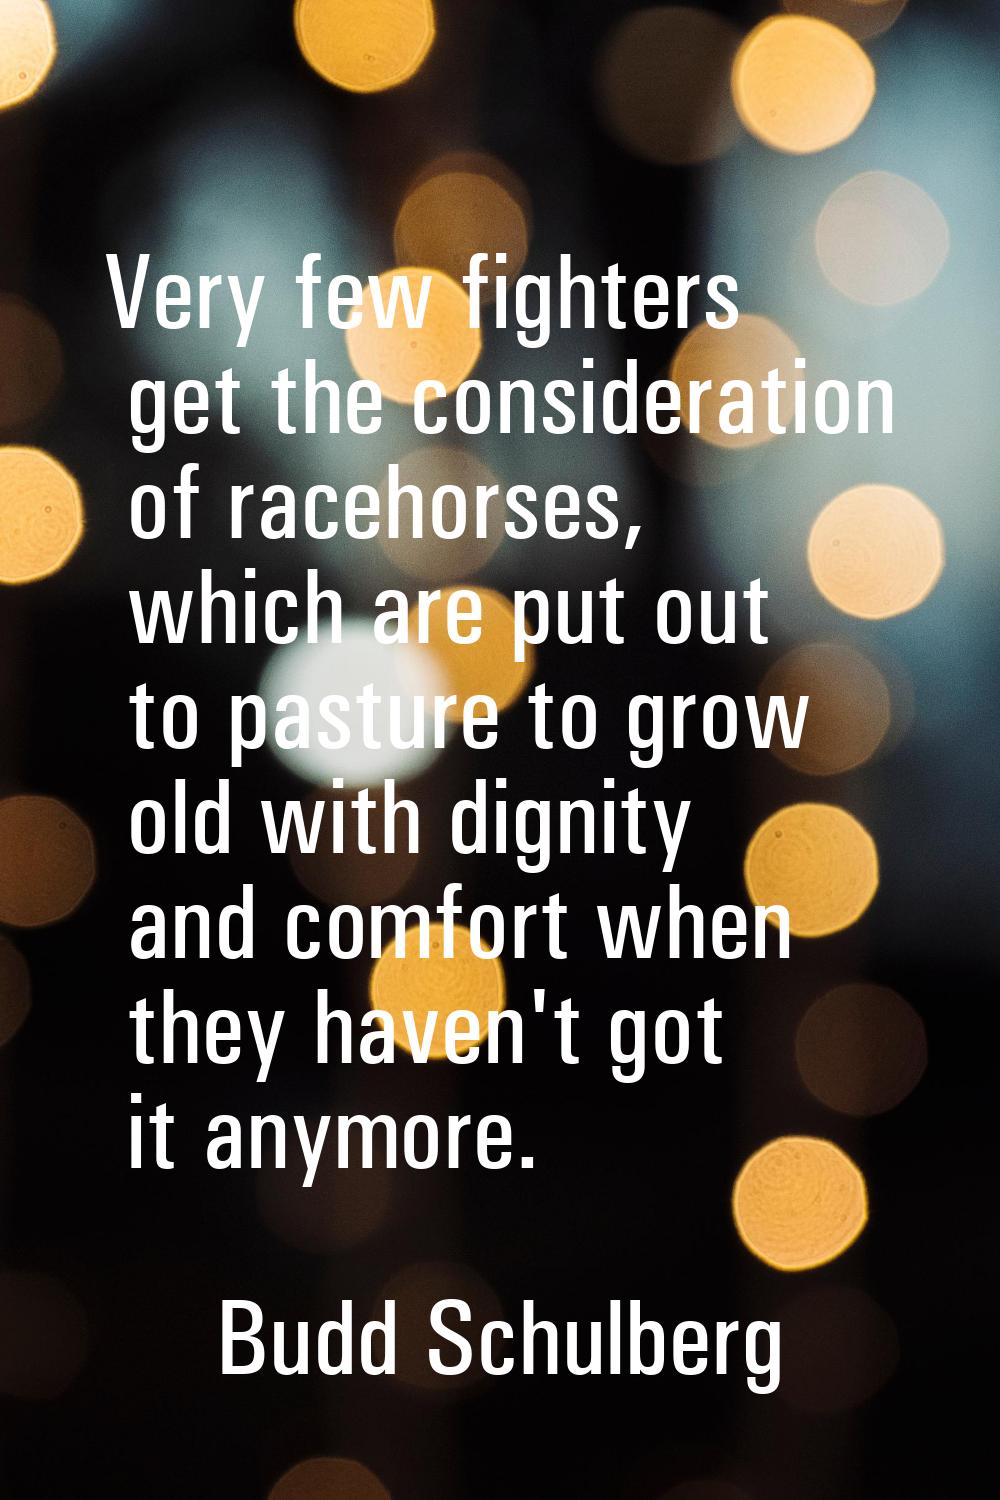 Very few fighters get the consideration of racehorses, which are put out to pasture to grow old wit